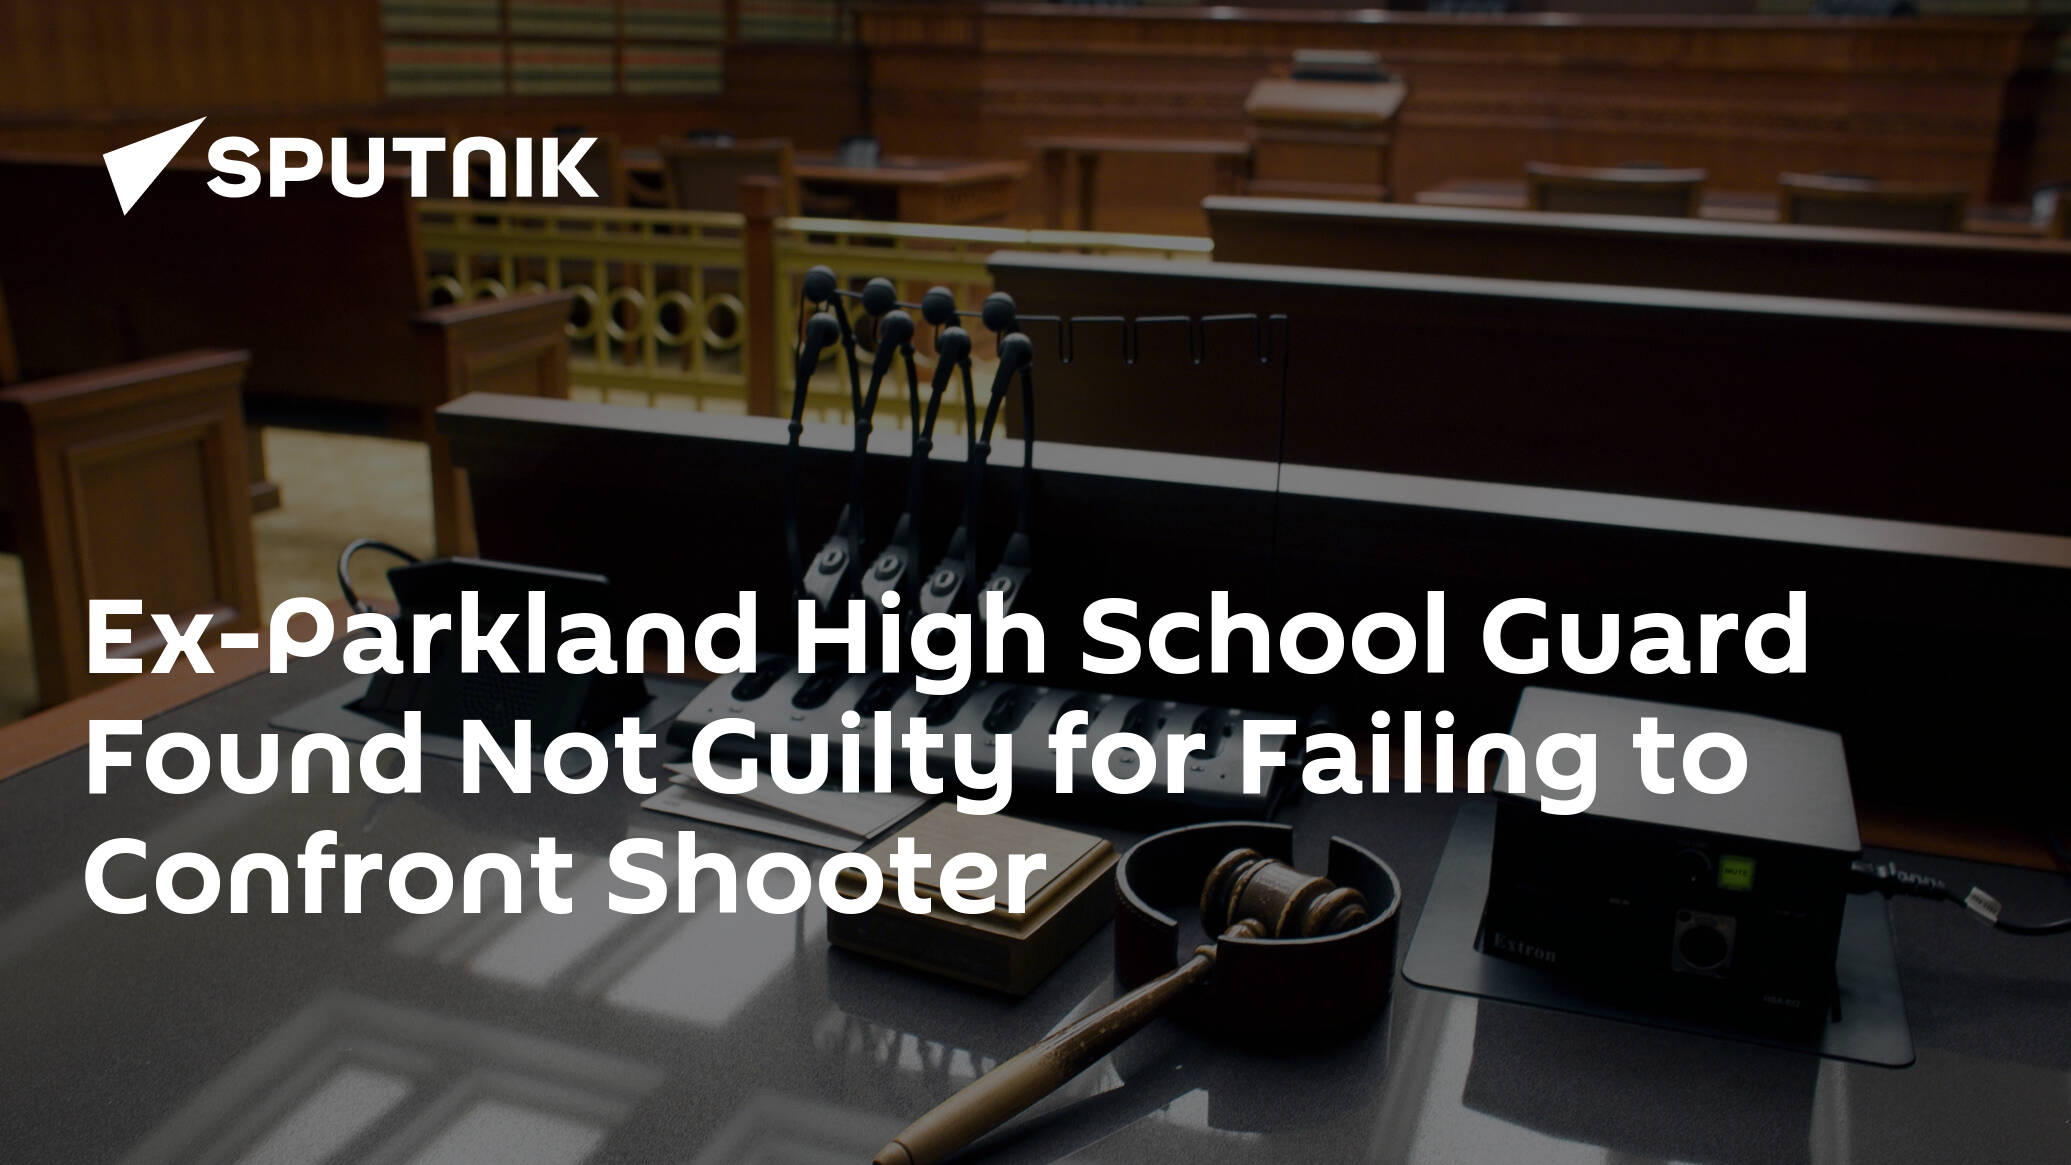 Ex-Parkland High School Guard Found Not Guilty for Failing to Confront Shooter